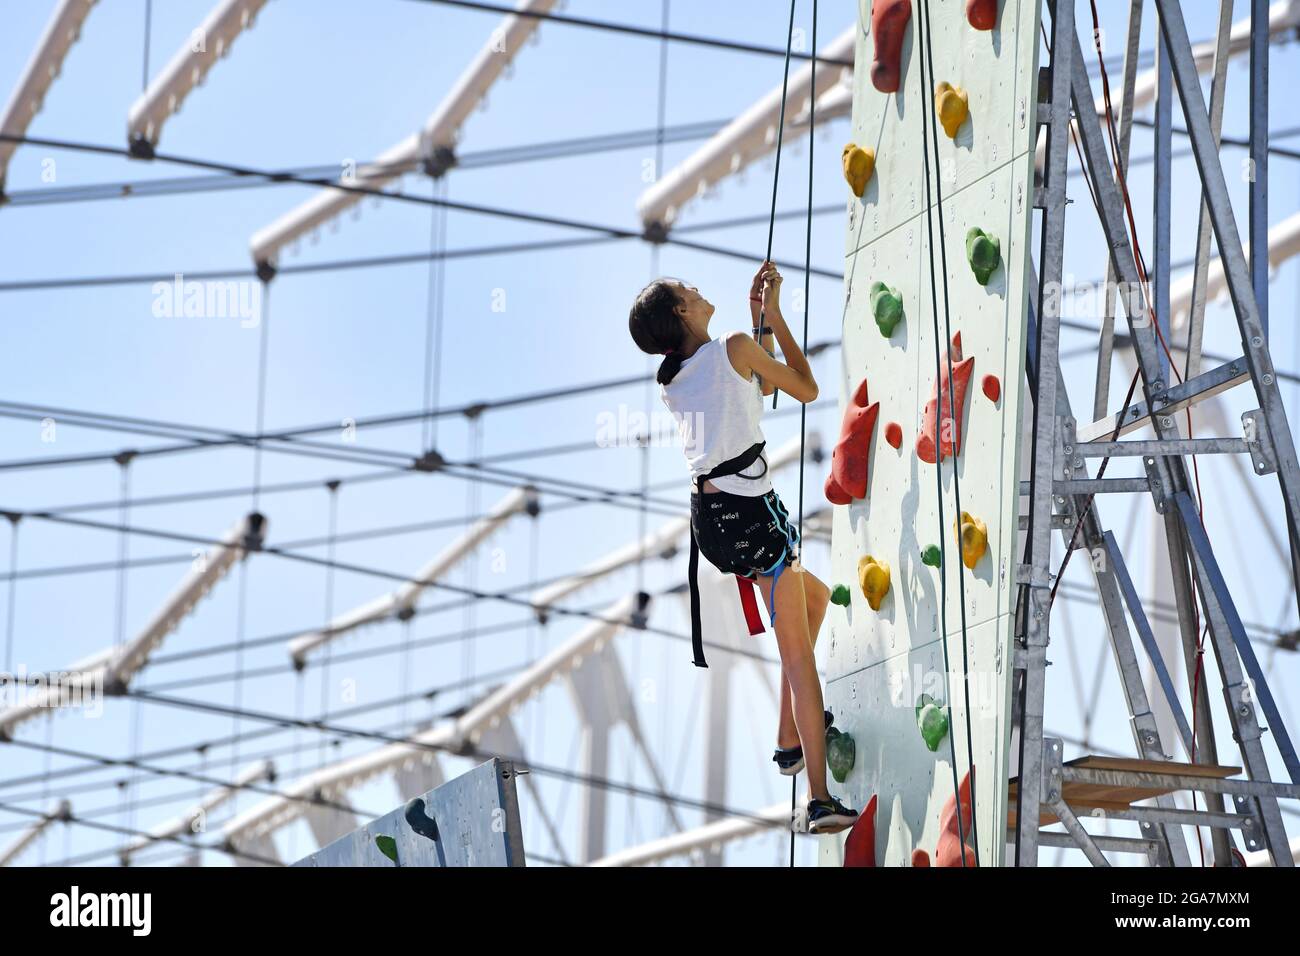 Practicing on a climbing wall, during a sports summer camp, in Milan. Stock Photo